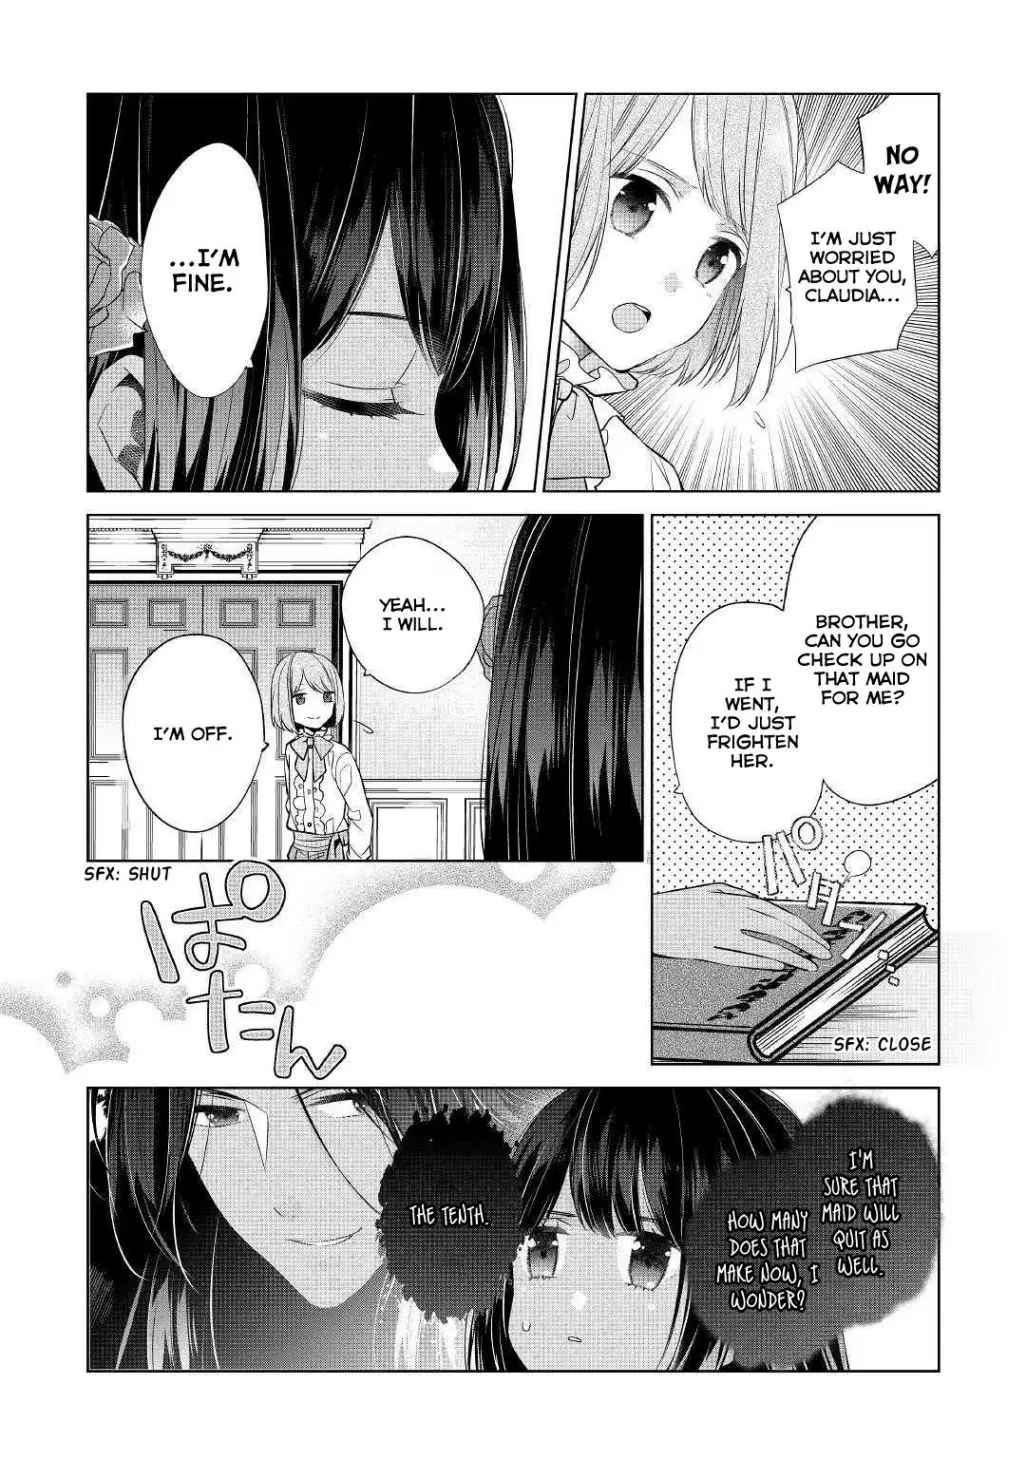 I'm Not a Villainess!! Just Because I Can Control Darkness Doesn’t Mean I’m a Bad Person! - 1 page 22